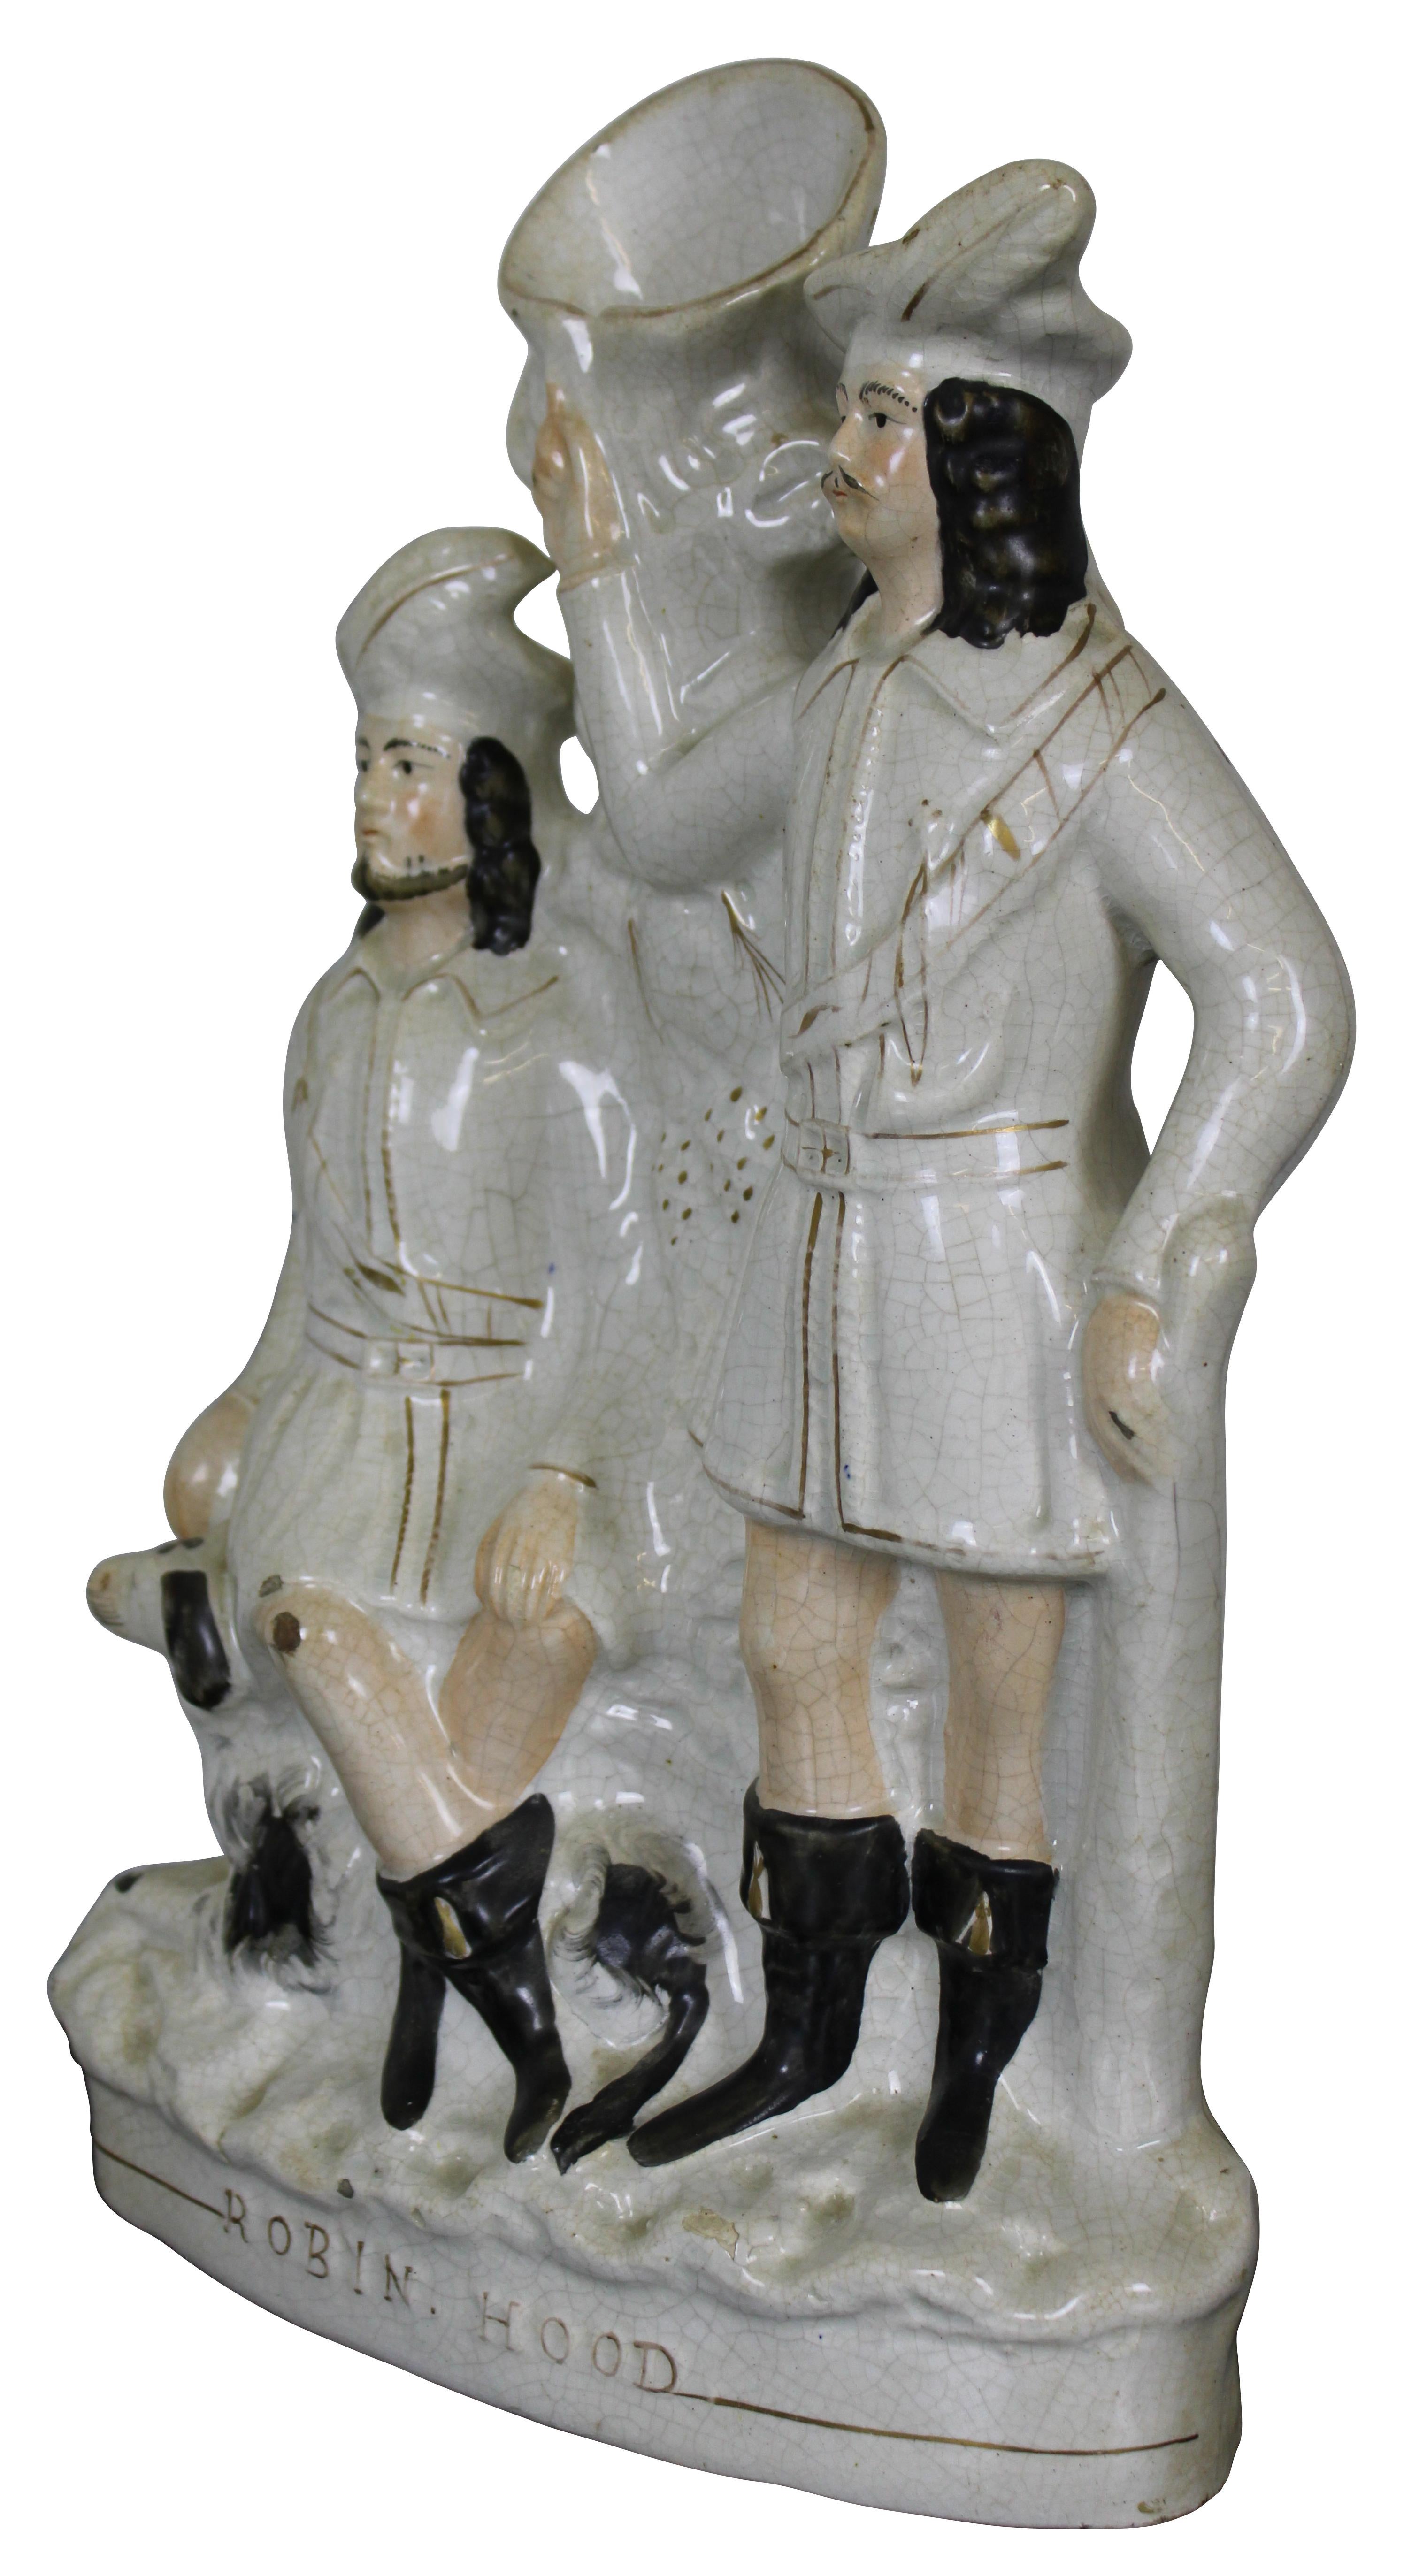 Circa mid 19th century antique Staffordshire English porcelain spill flower vase sculpture showing the folk heroes Robin Hood and Little John with a dog. Measure: 15”.
 